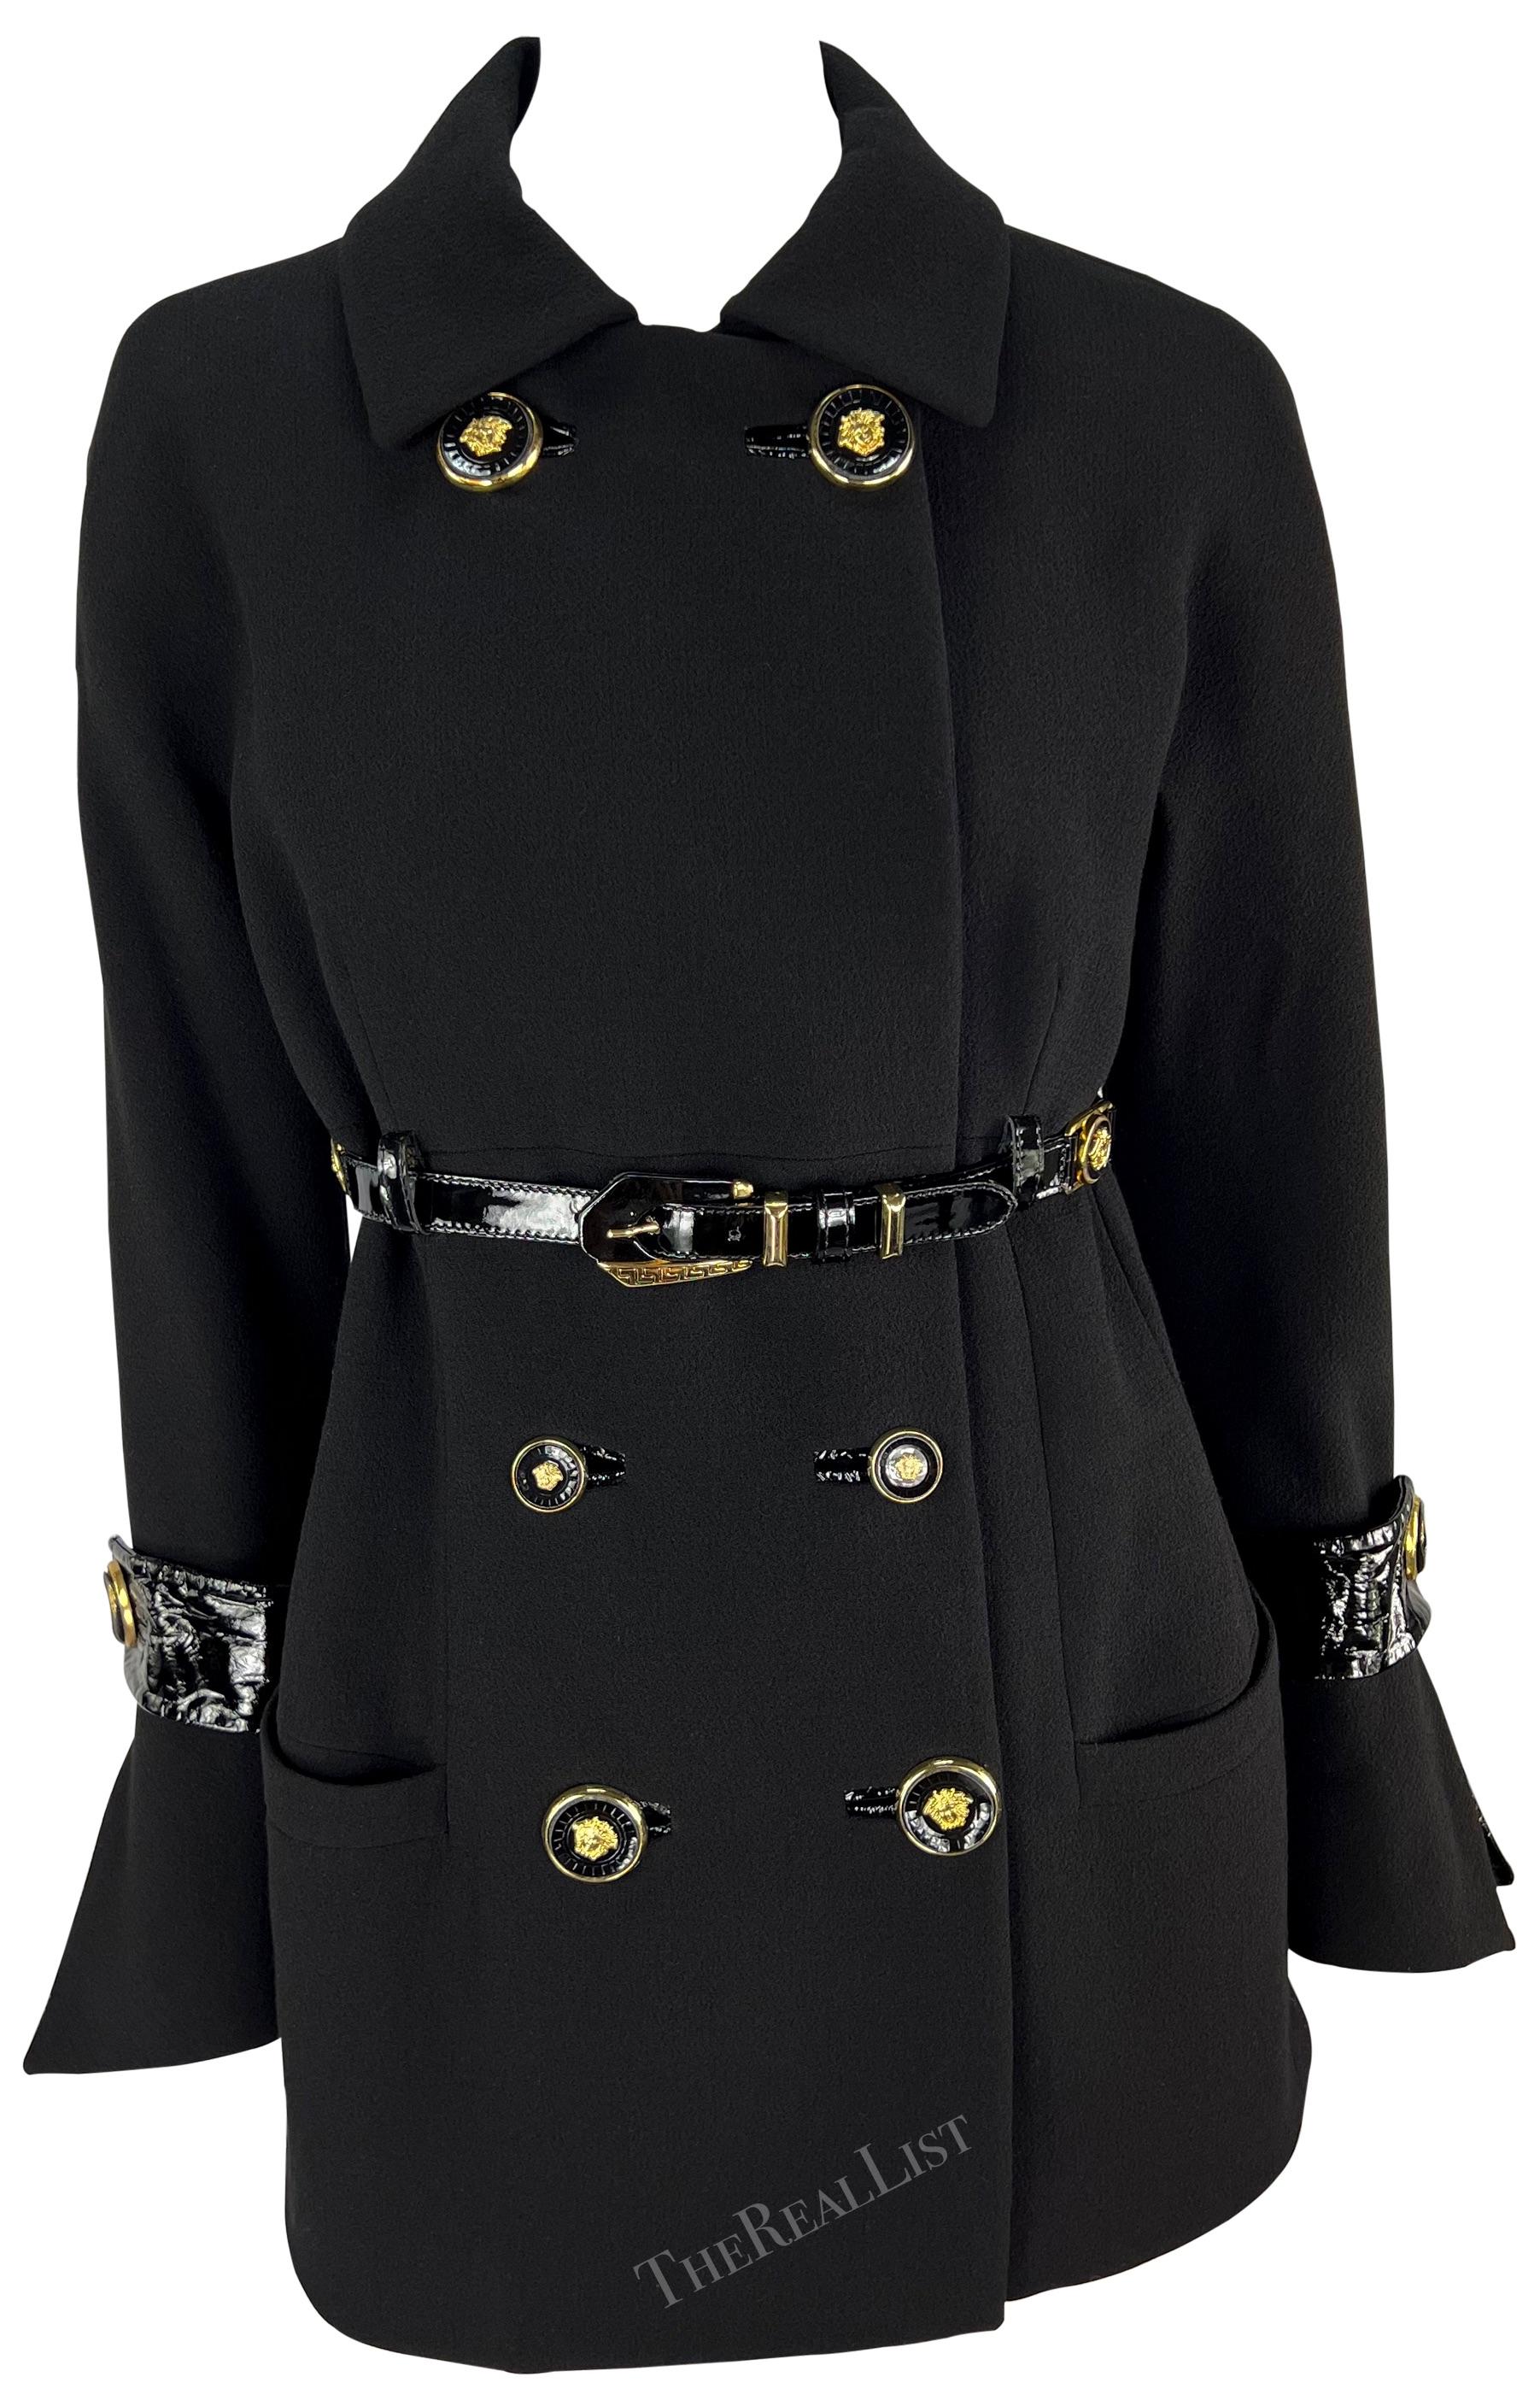 Presenting a fabulous black double-breasted Gianni Versace coat, designed by Gianni Versace. From the Fall/Winter 1994 collection, many similar styles debuted on the season's runway. This incredibly chic jacket features a double-breasted closure, a